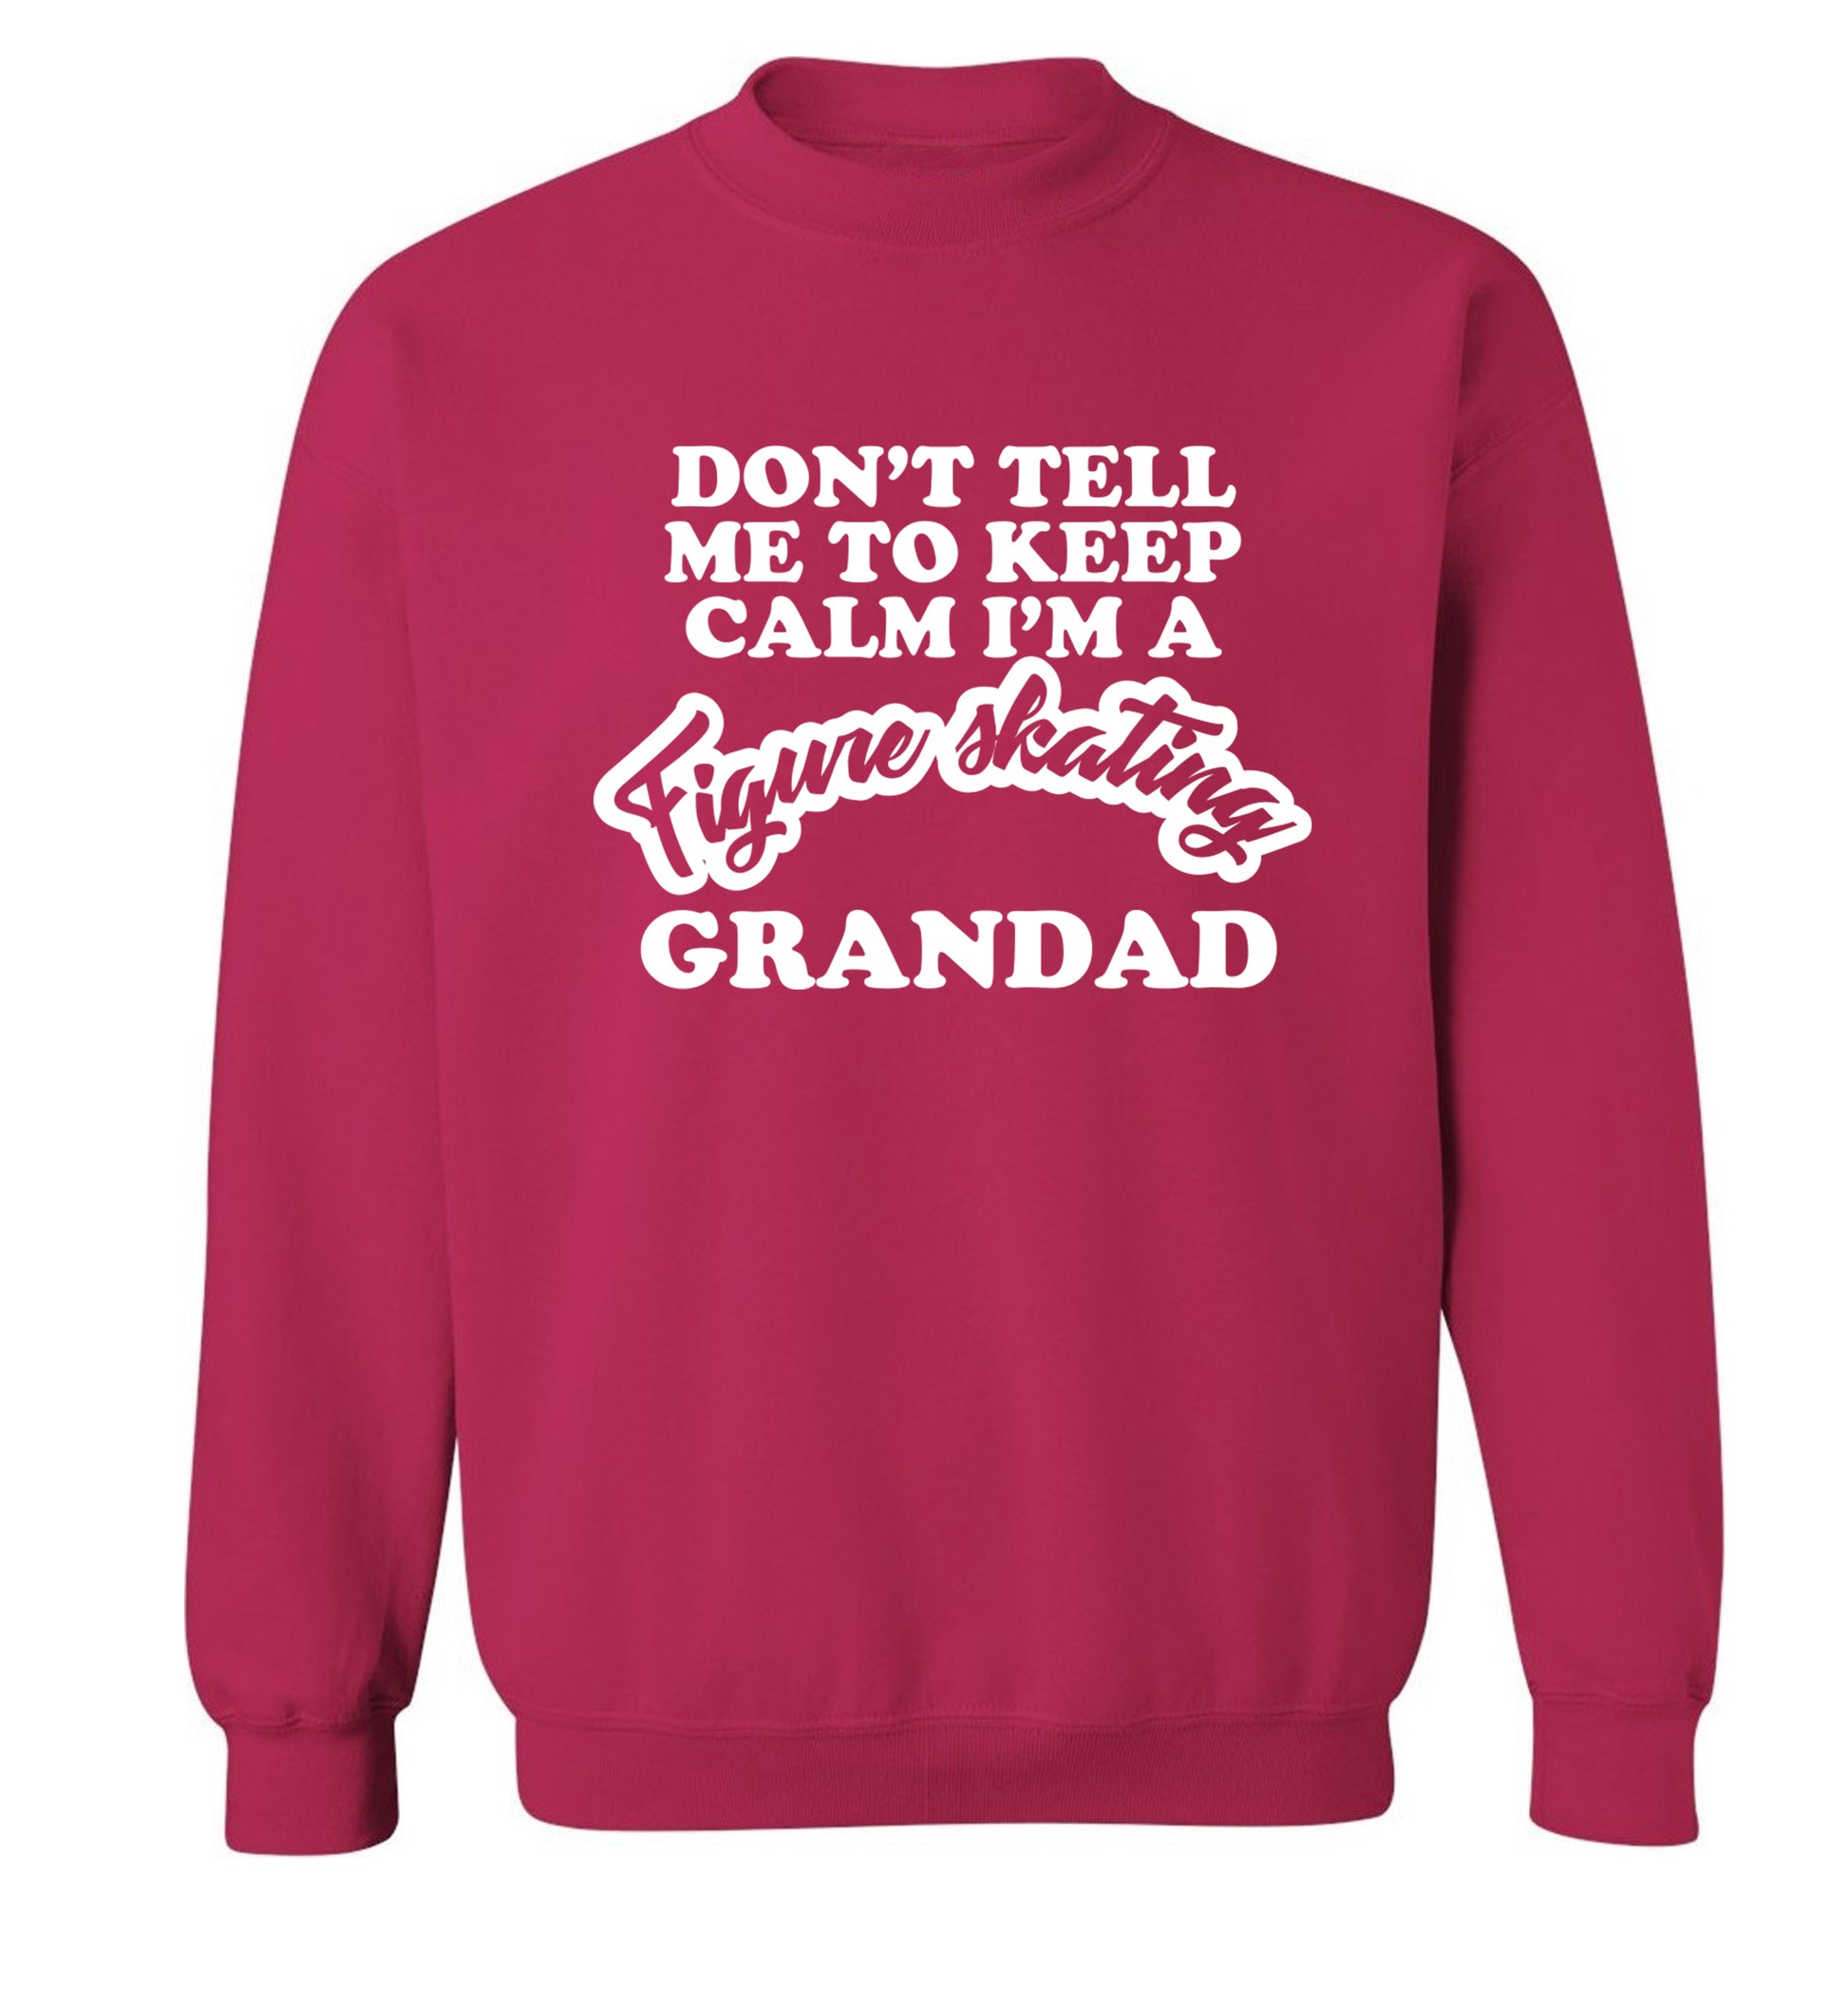 Don't tell me to keep calm I'm a figure skating grandad Adult's unisexpink Sweater 2XL